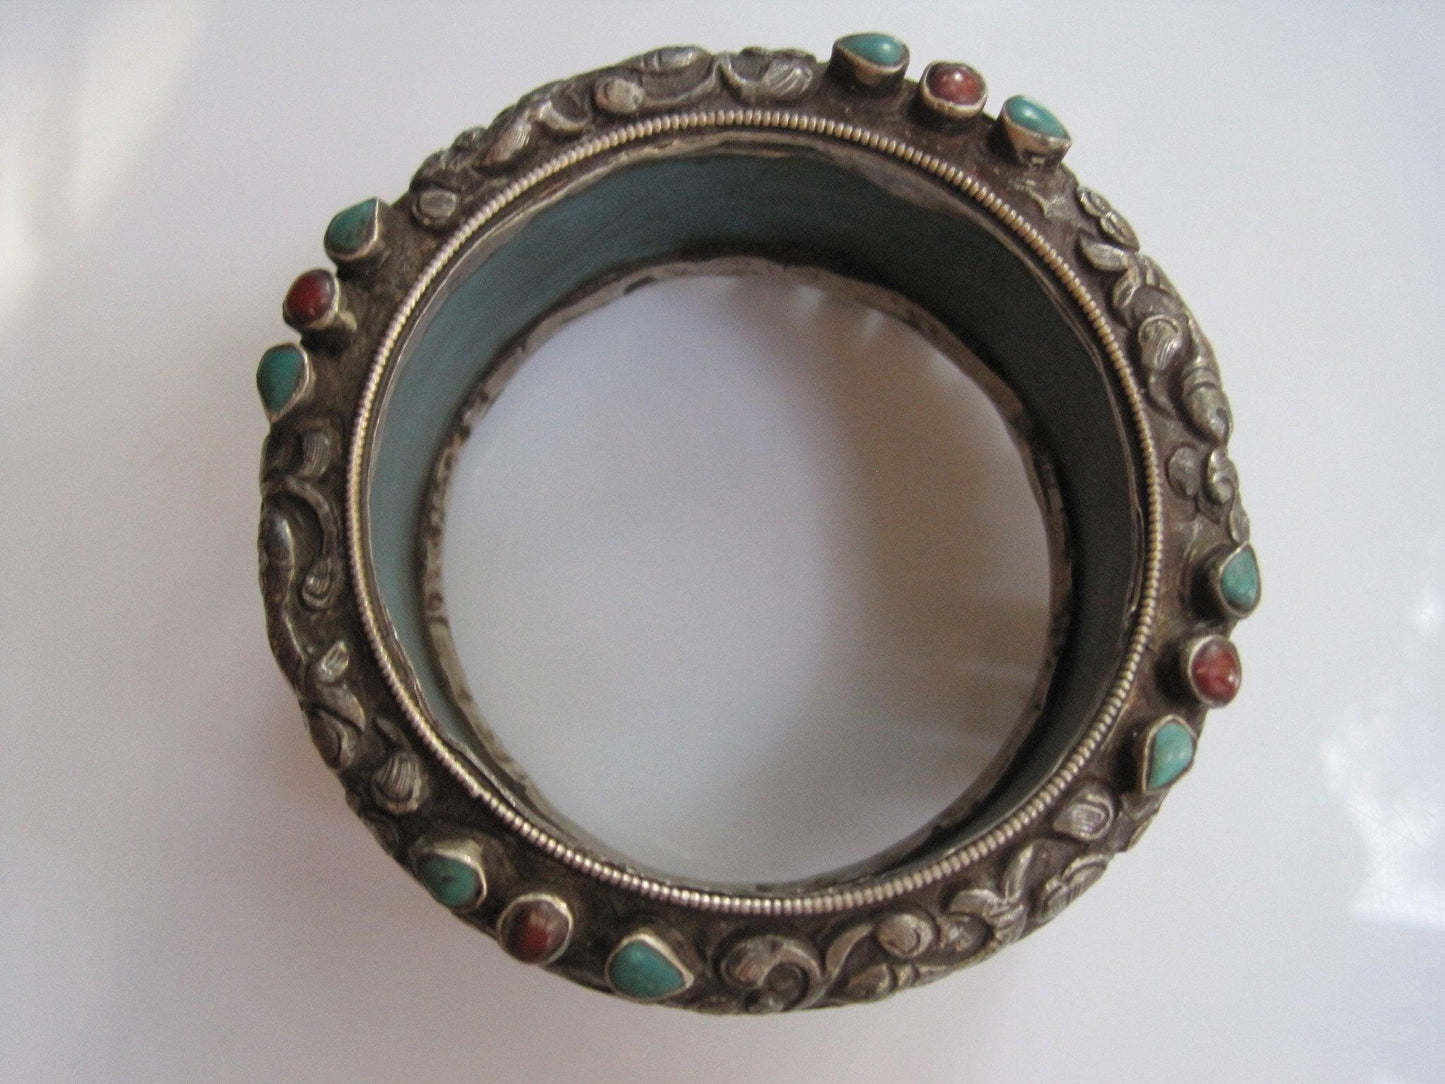 Vintage Carved Animal Blue Resin Bracelet from Nepal or Tibet with Silver Overlay - Anteeka